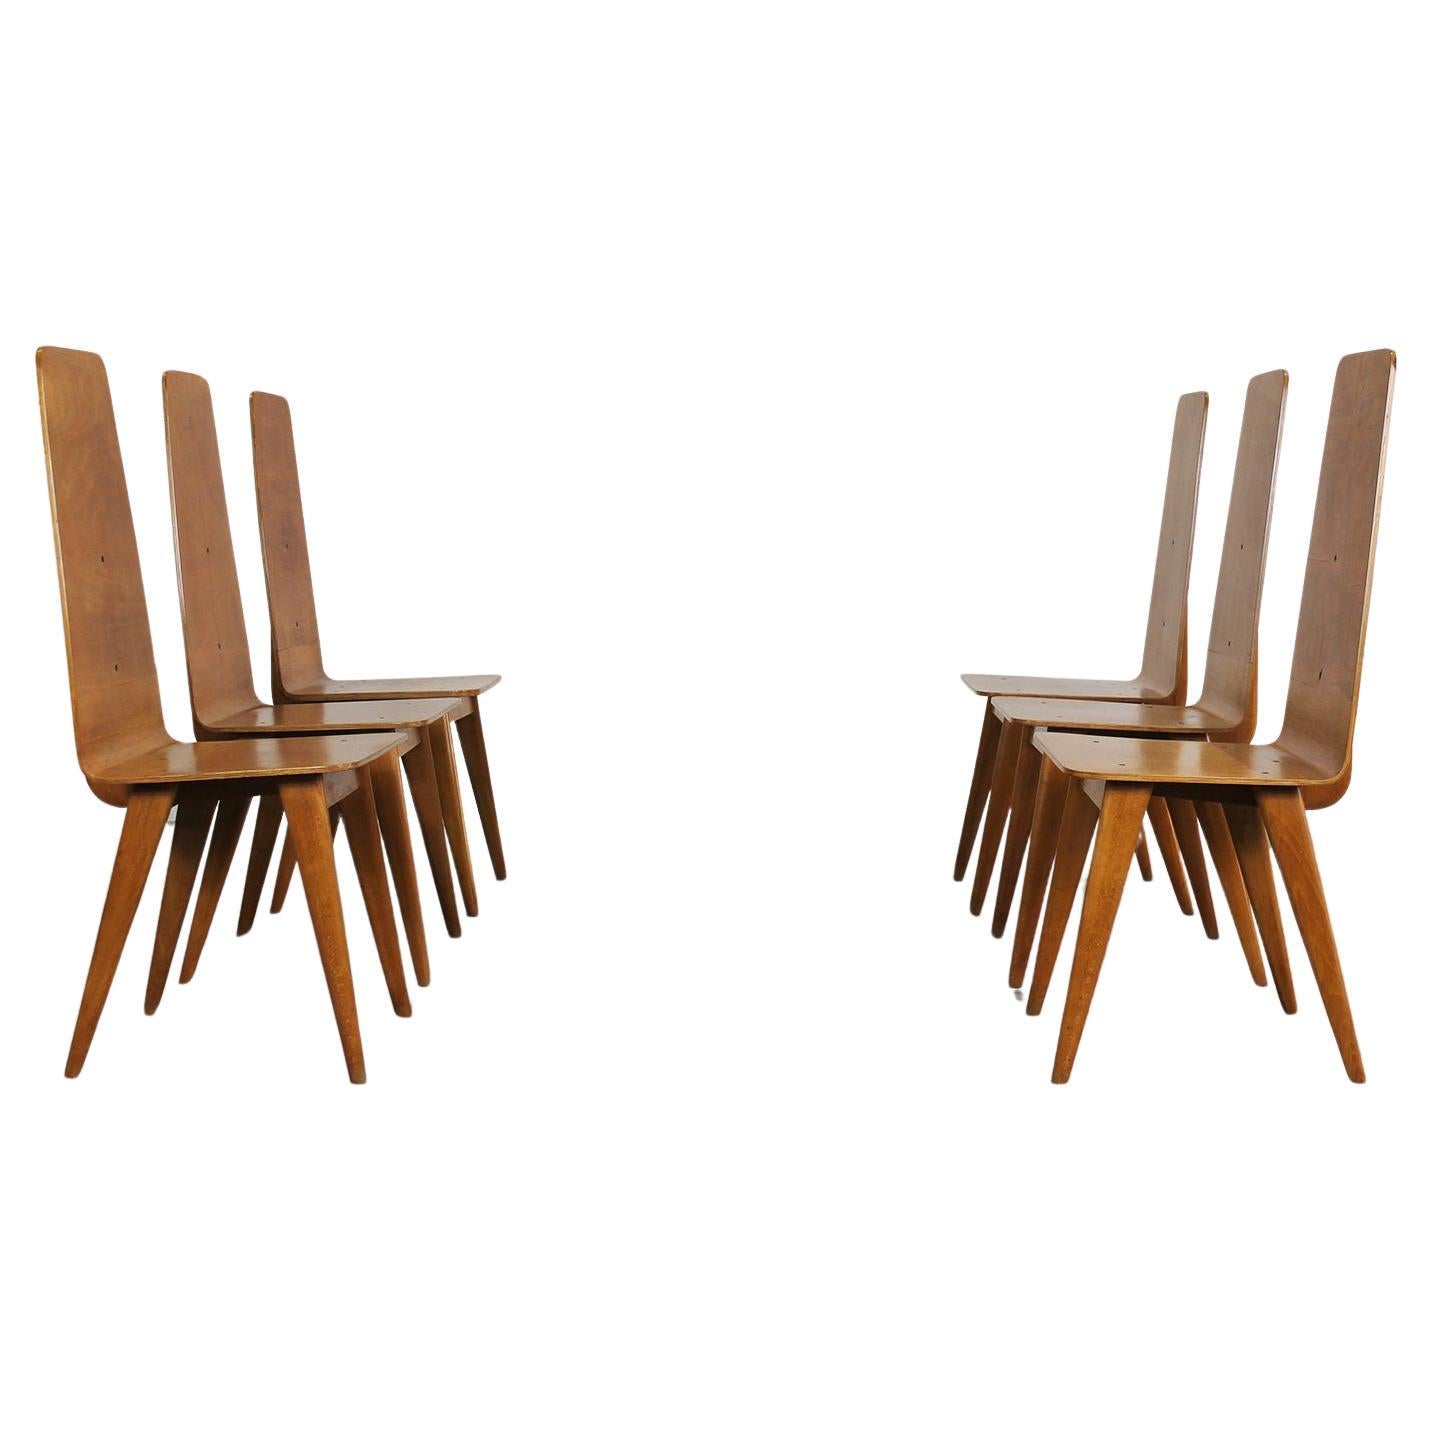 Set of Six Dining Chairs in Wood by Sineo Gemignani Italian Manufacture 1940s For Sale